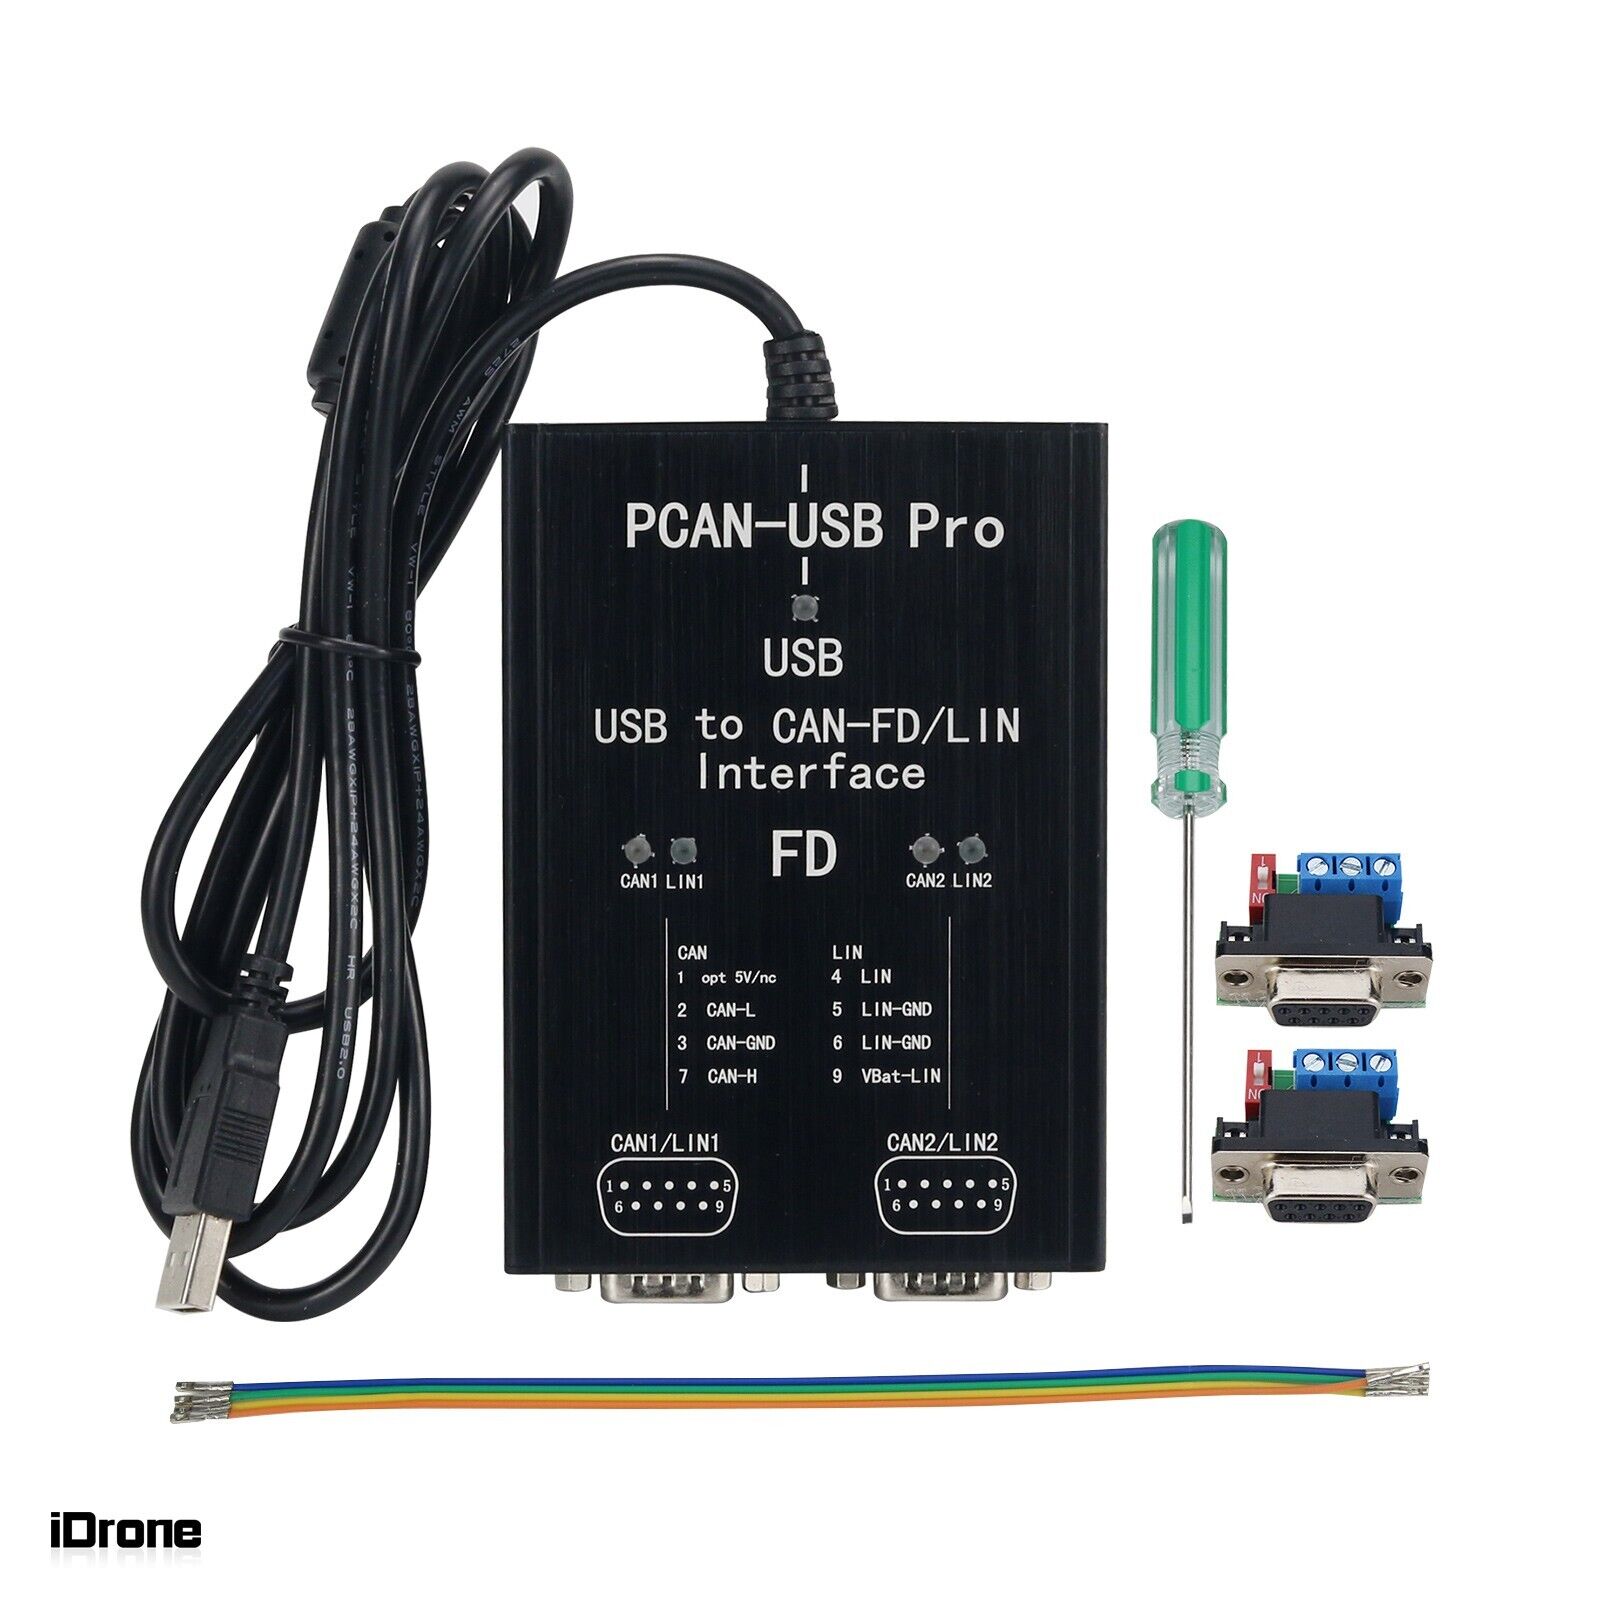 PCAN-USB Pro PCAN FD PRO 12Mbit/s USB to CAN Adapter 2CH FD for PEAK IPEH-004061